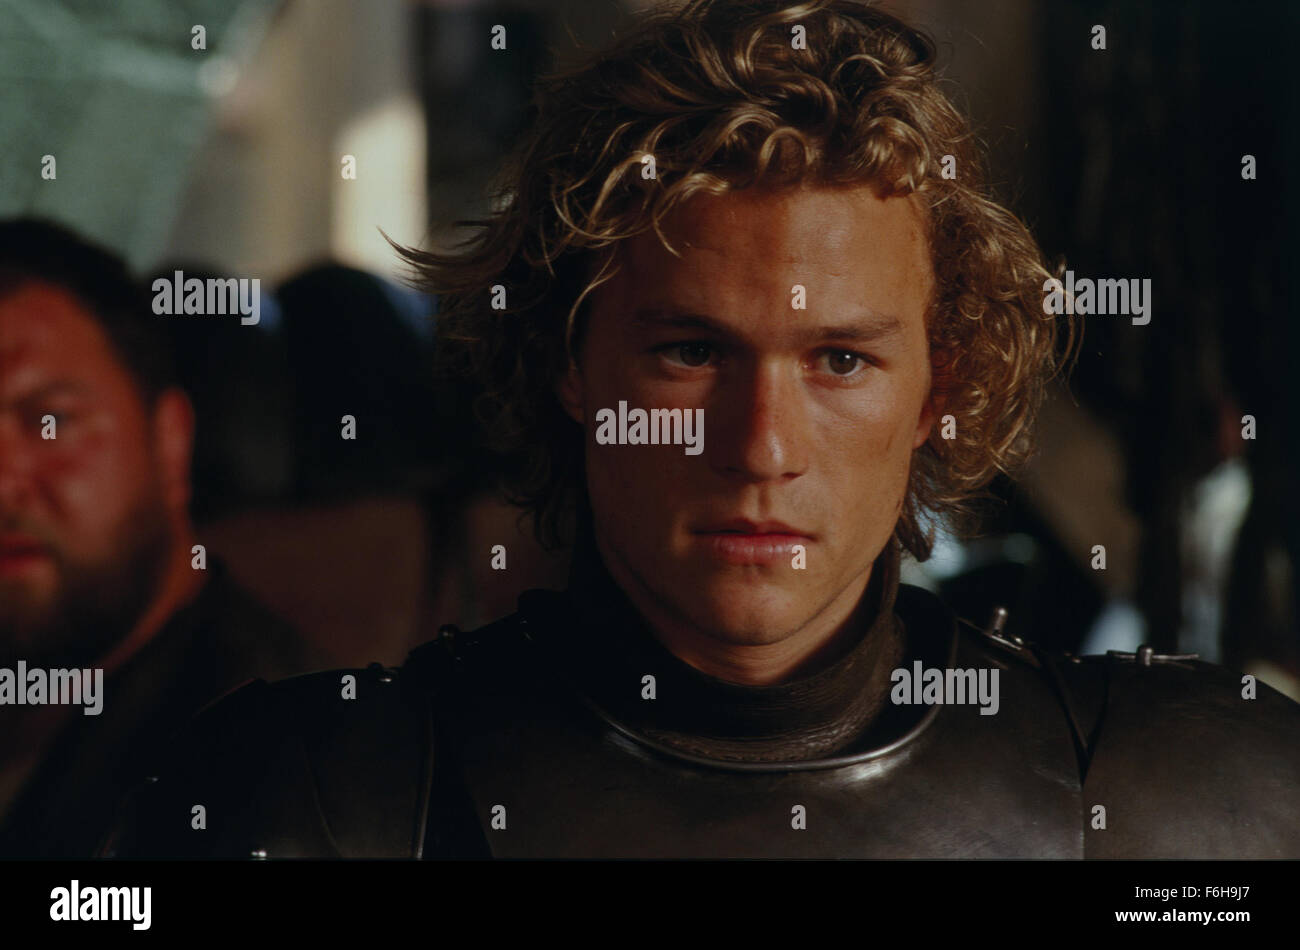 RELEASED Oct 11, 2001 - A KNIGHT'S TALE - From peasant to knight - one man can change his stars. Directed by Brian Helgeland. Shot in Prague, Czech Republic.   Actor HEATH LEDGER as Sir William Thatcher / Sir Ulrich von Lichtenstein of Gelderland in 'A Knight's Tale'. Stock Photo